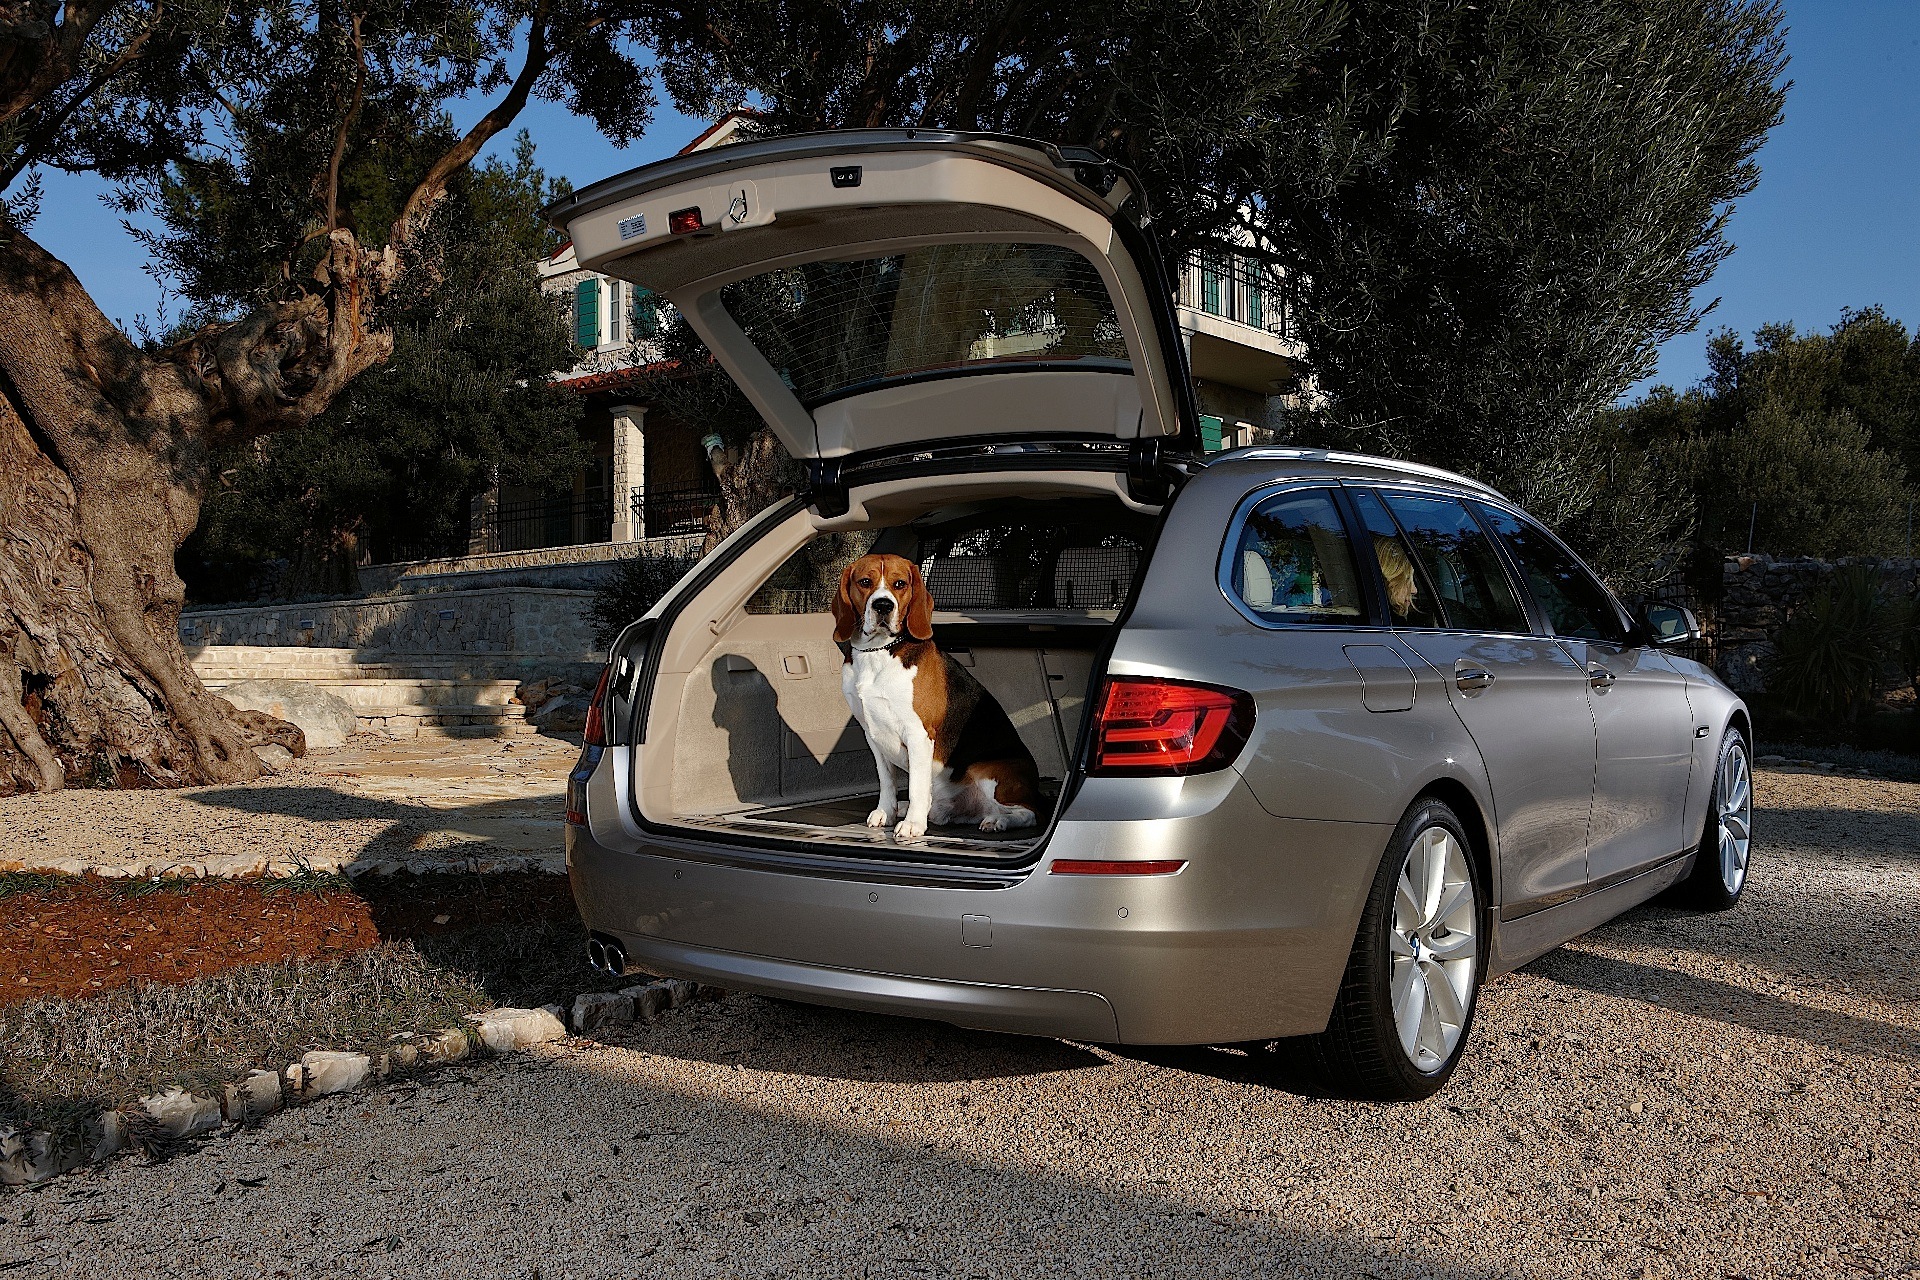 BMW 5 Series Touring (F11) Photos and Specs. Photo: 5 Series